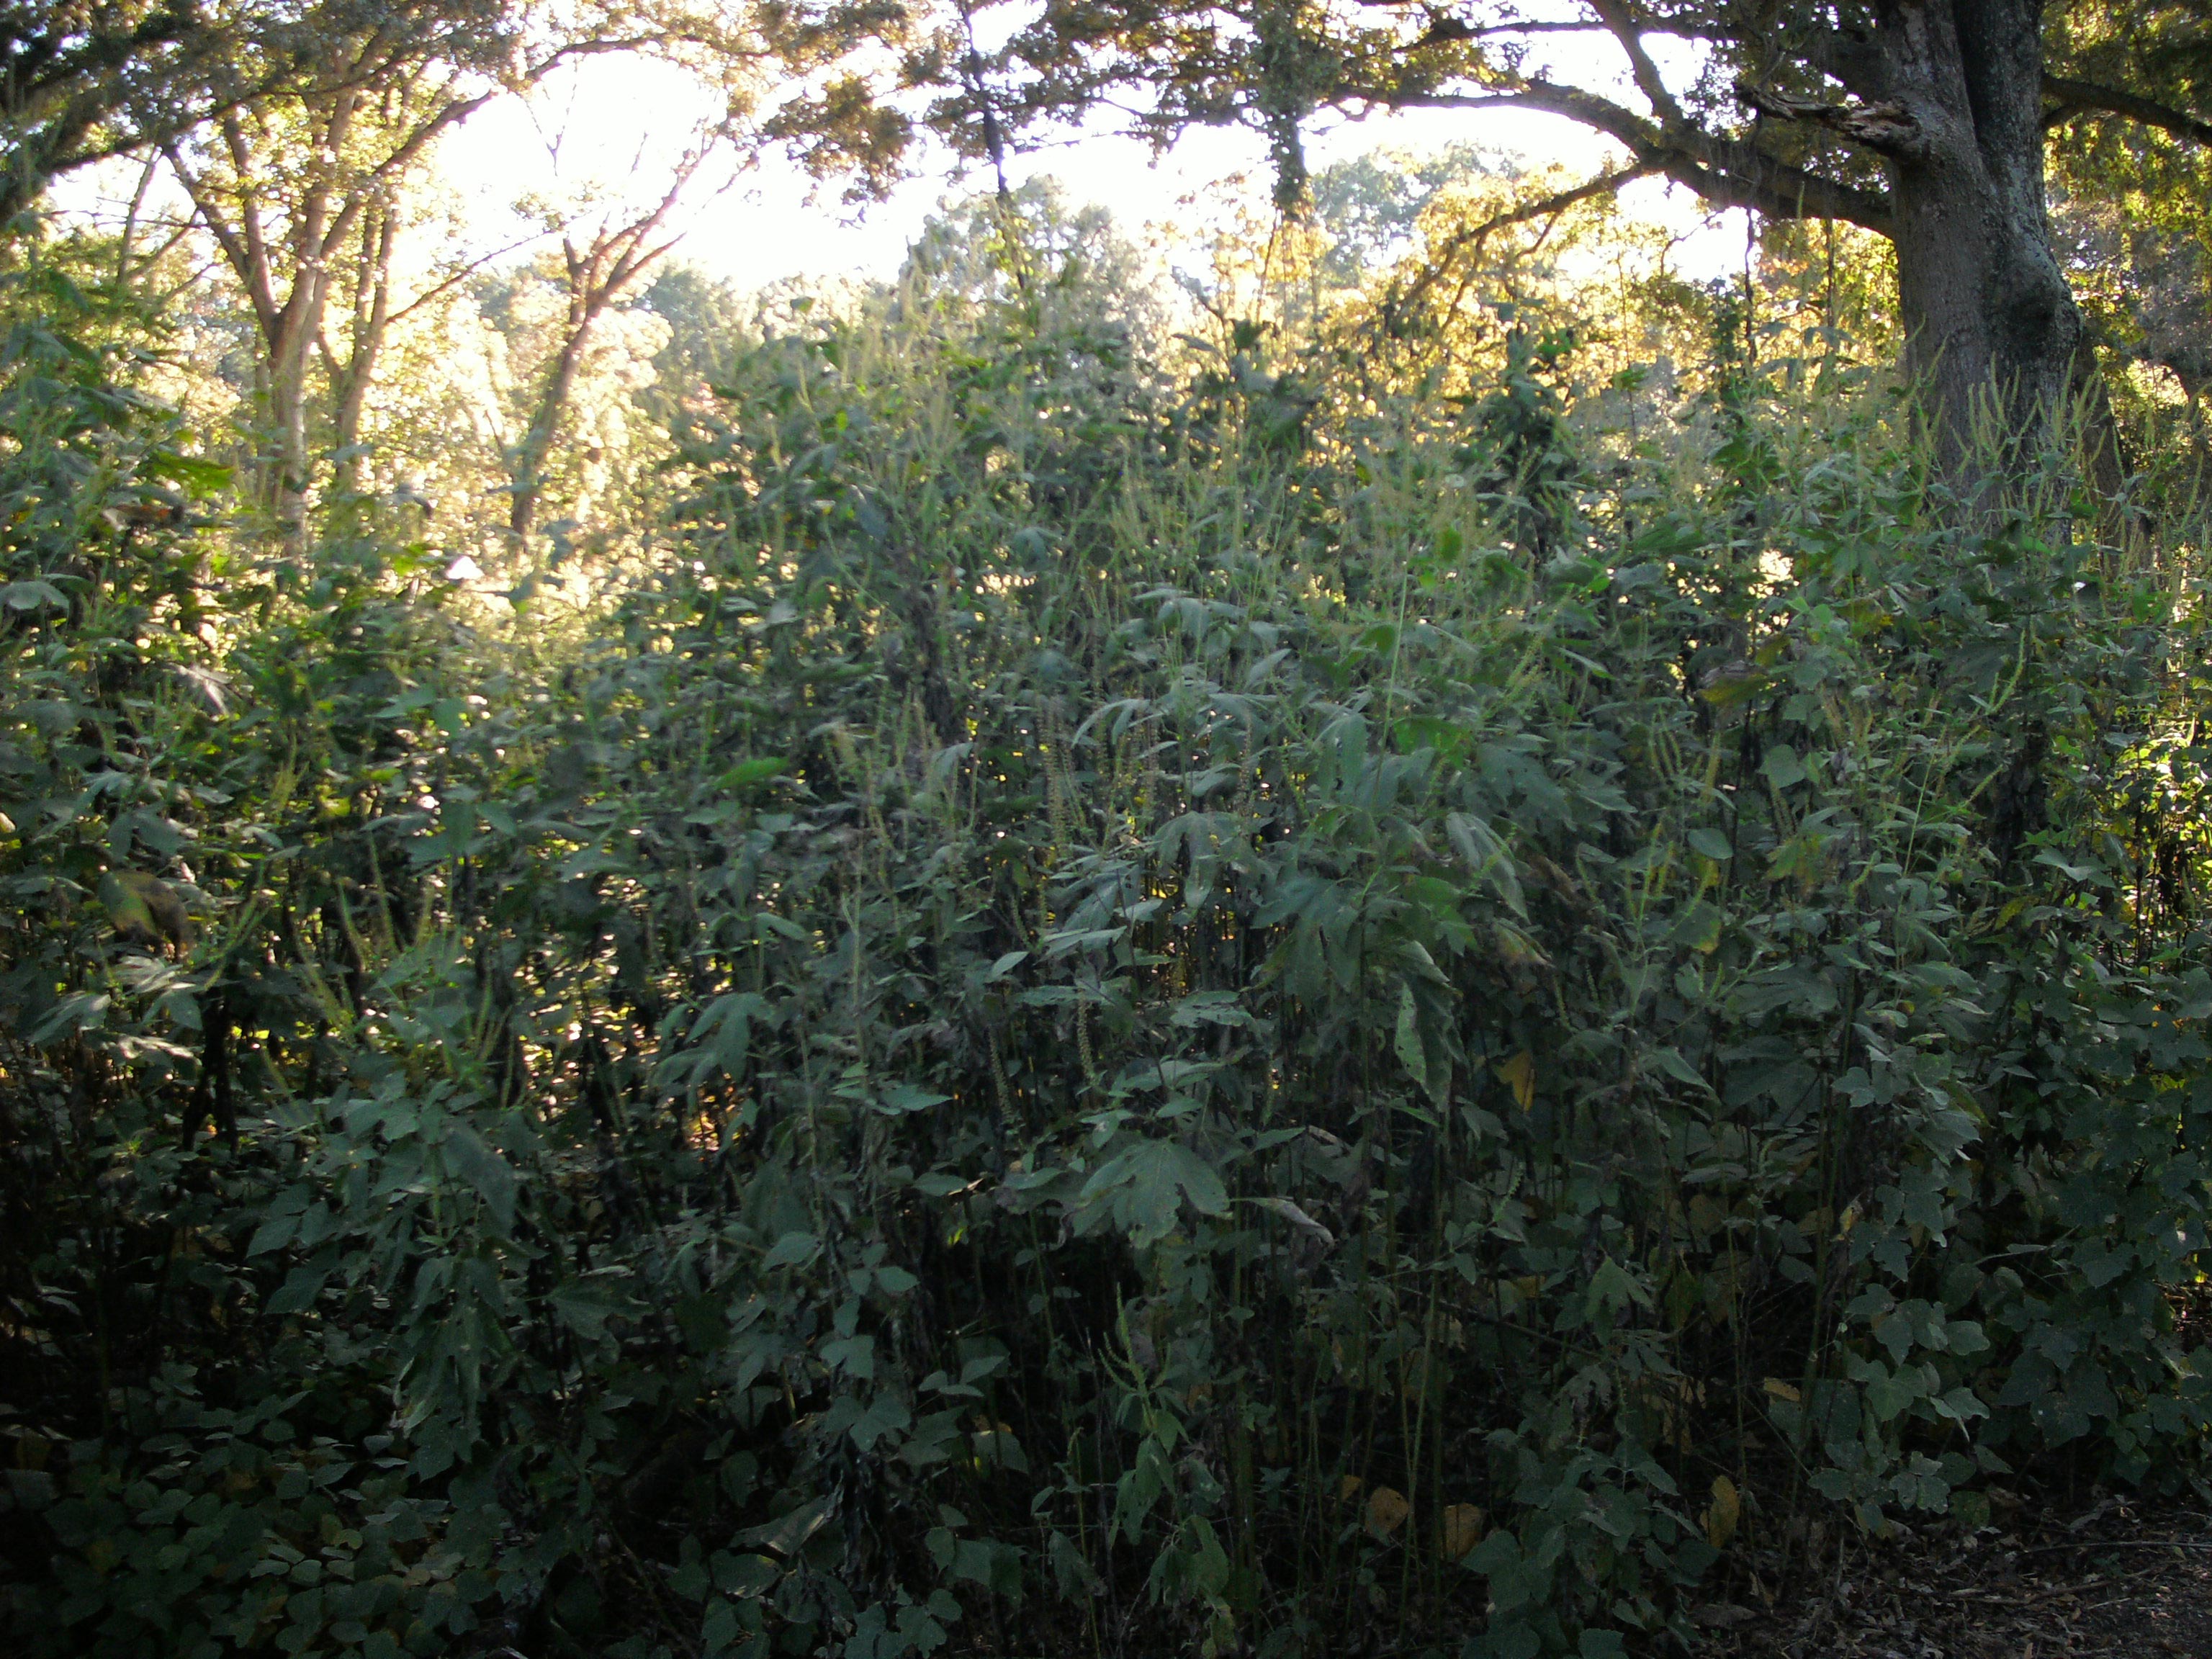 Giant Ragweed Identification Walter Reeves The